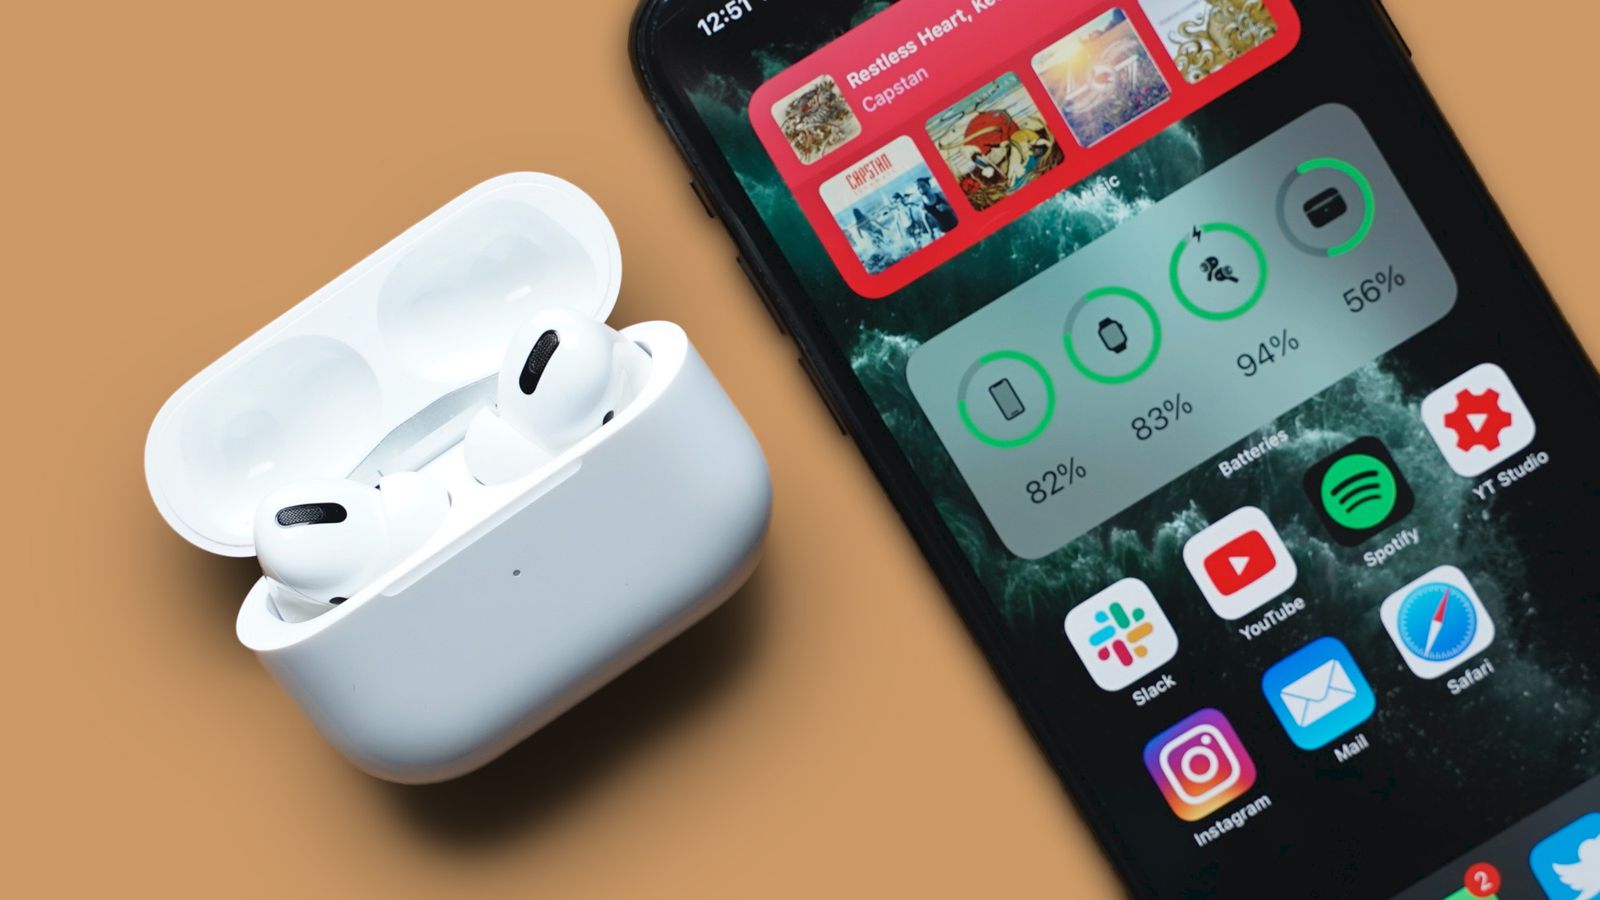 iOS 14's New AirPods Features: Spatial Audio, Automatic Device Switching, Battery Notifications More - MacRumors